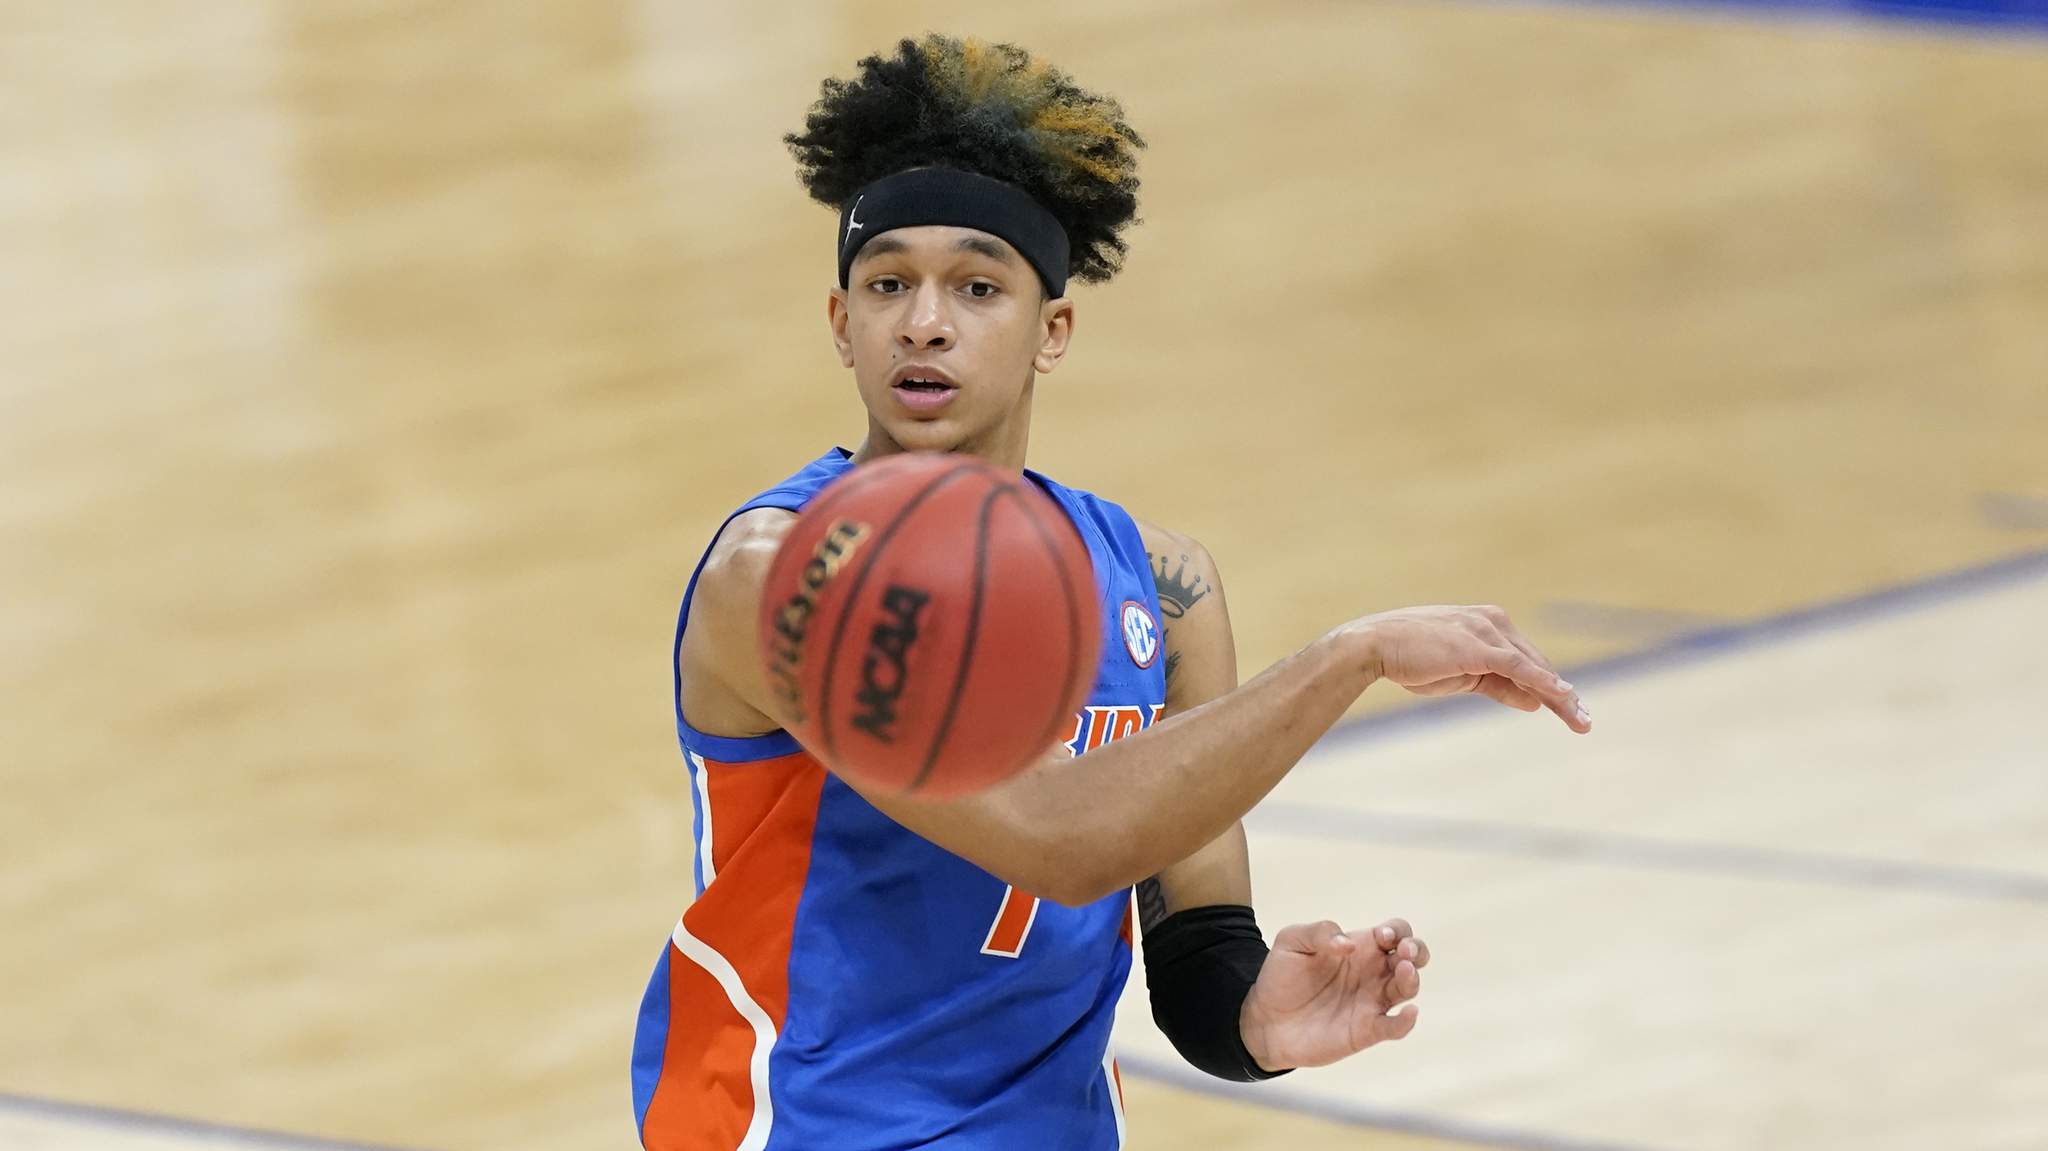 Florida vs. Oral Roberts: How to watch, stream, listen